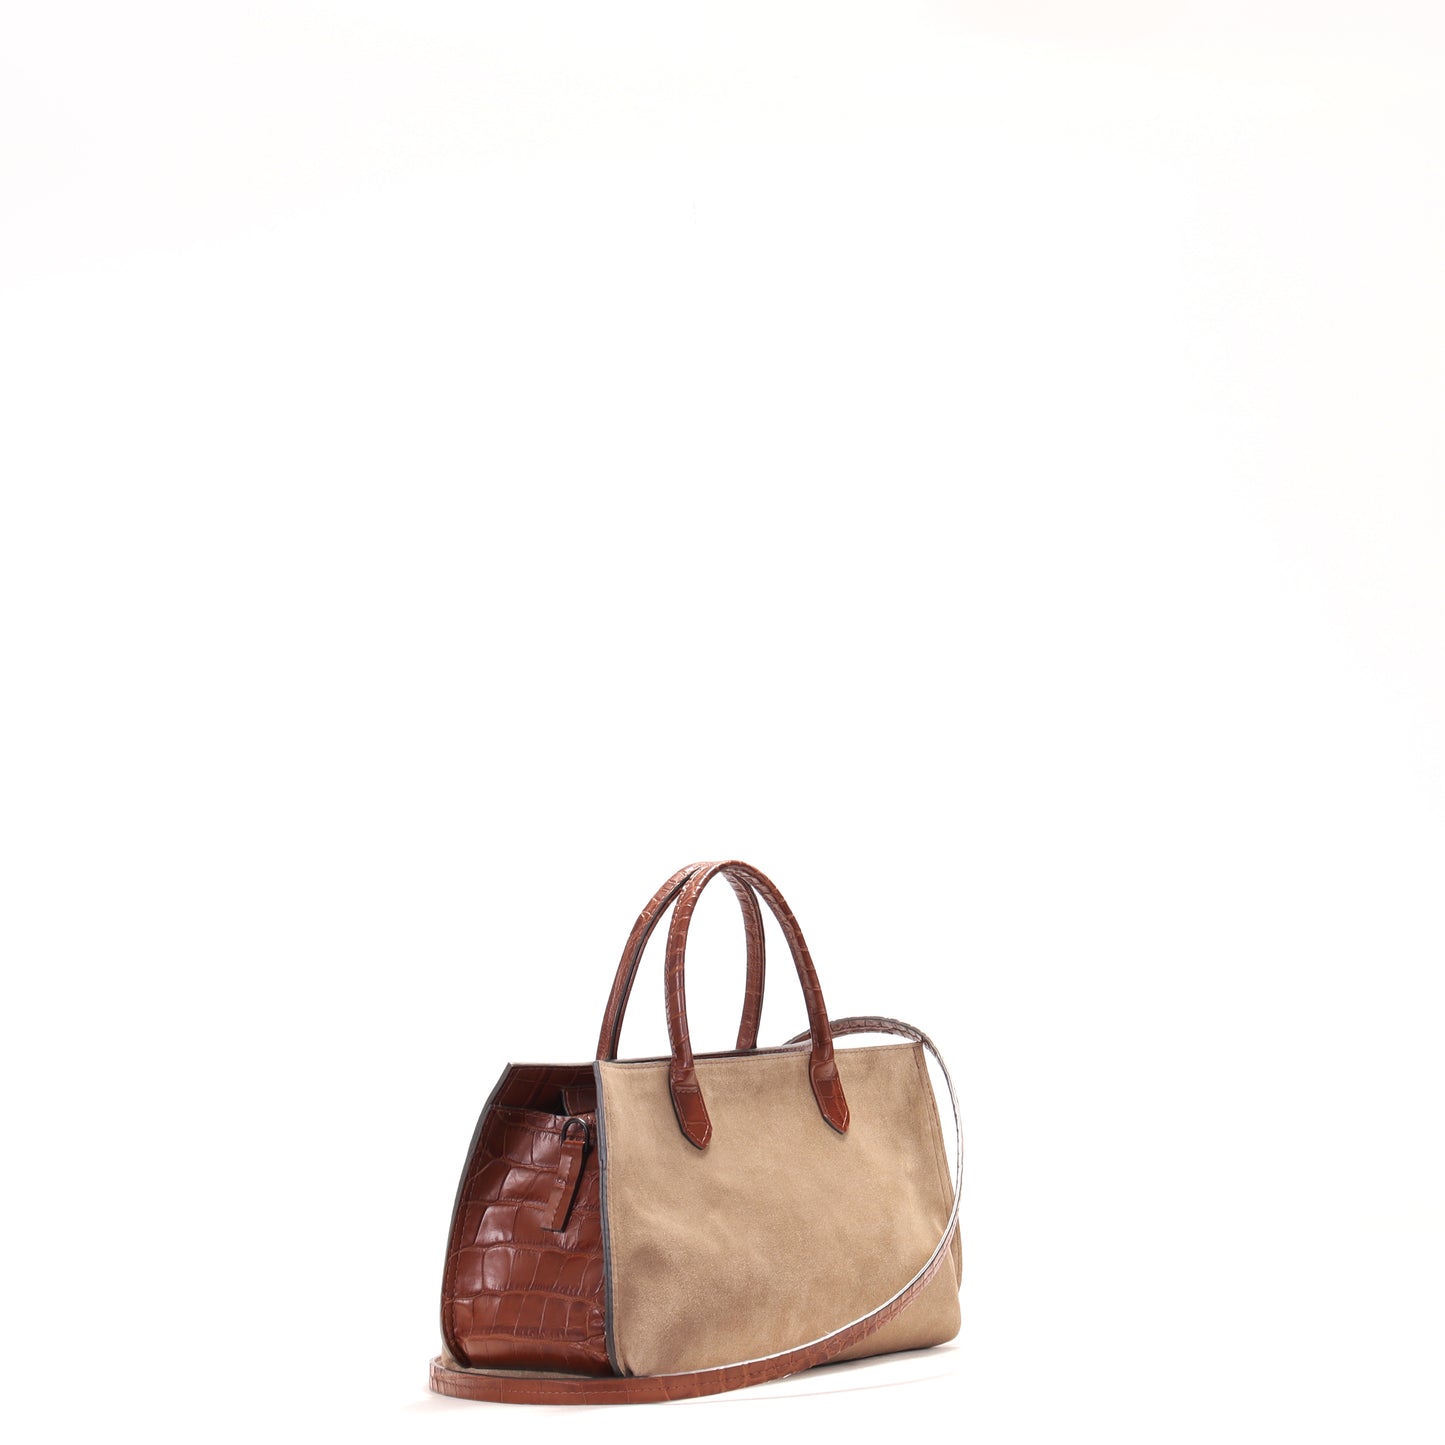 SMALL DAY BAG 2 TONE BUCKSKIN SUEDE HICKORY EMBOSSED GATOR